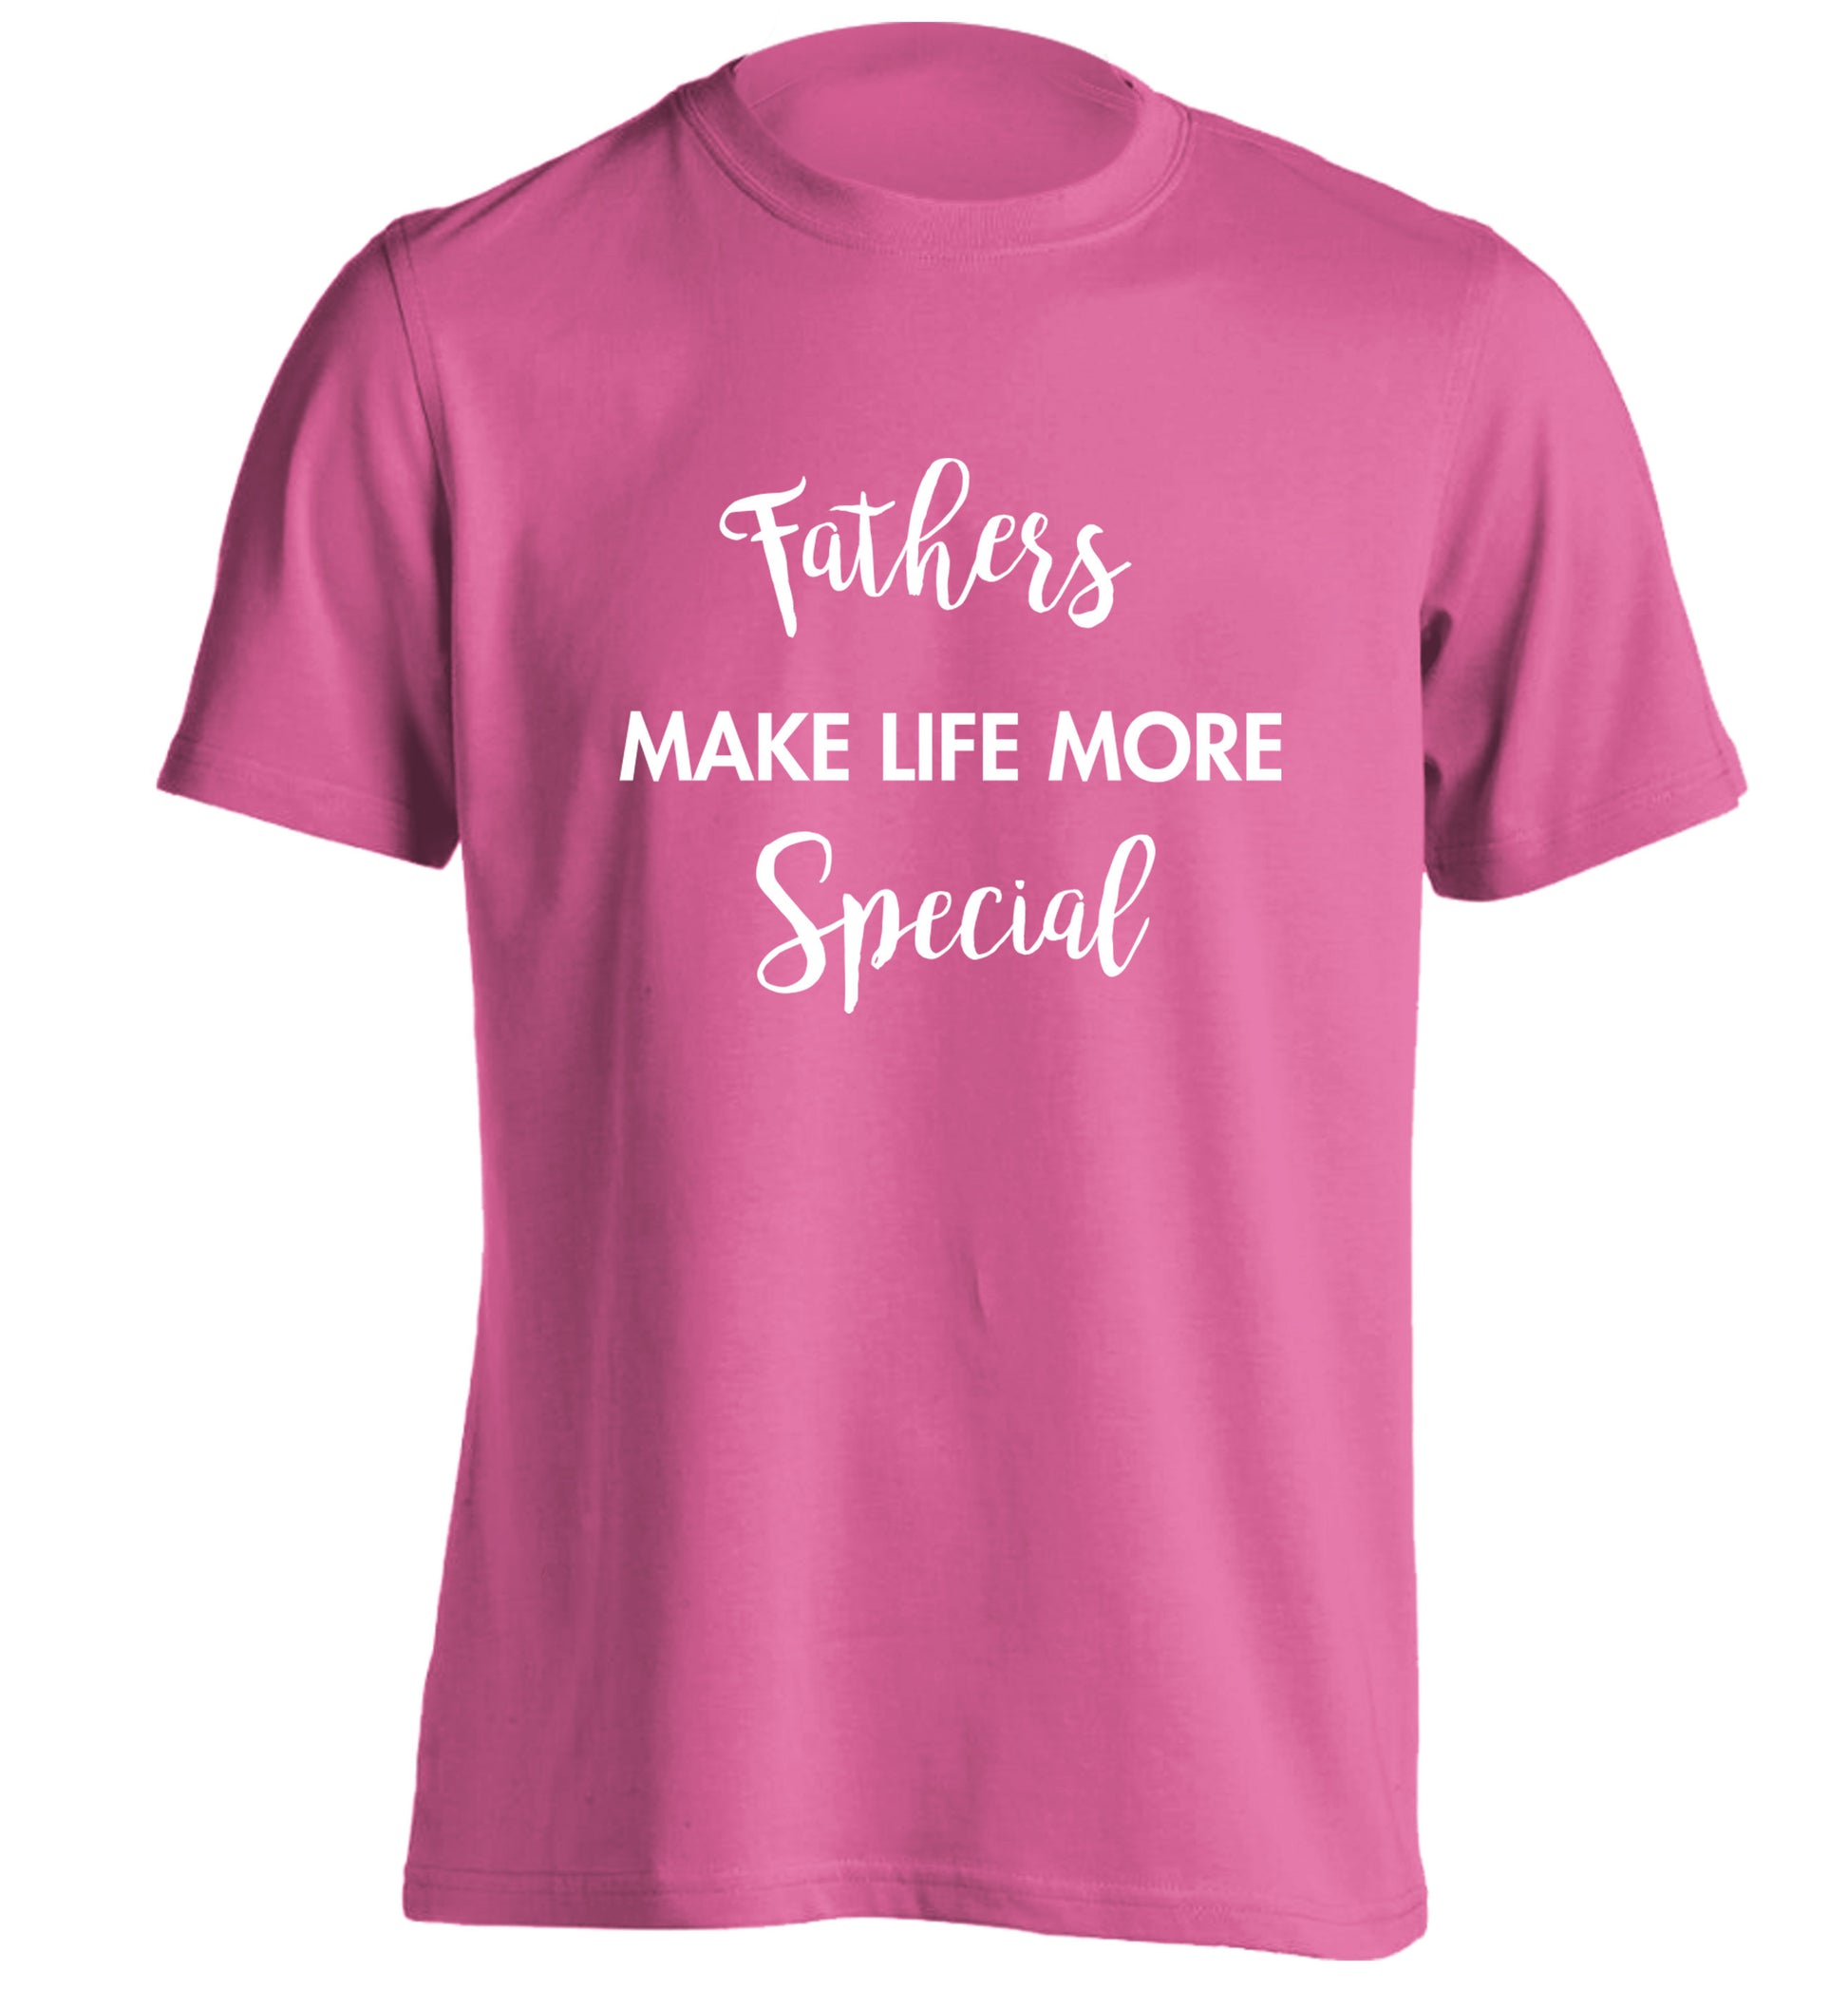 Fathers make life more special adults unisex pink Tshirt 2XL